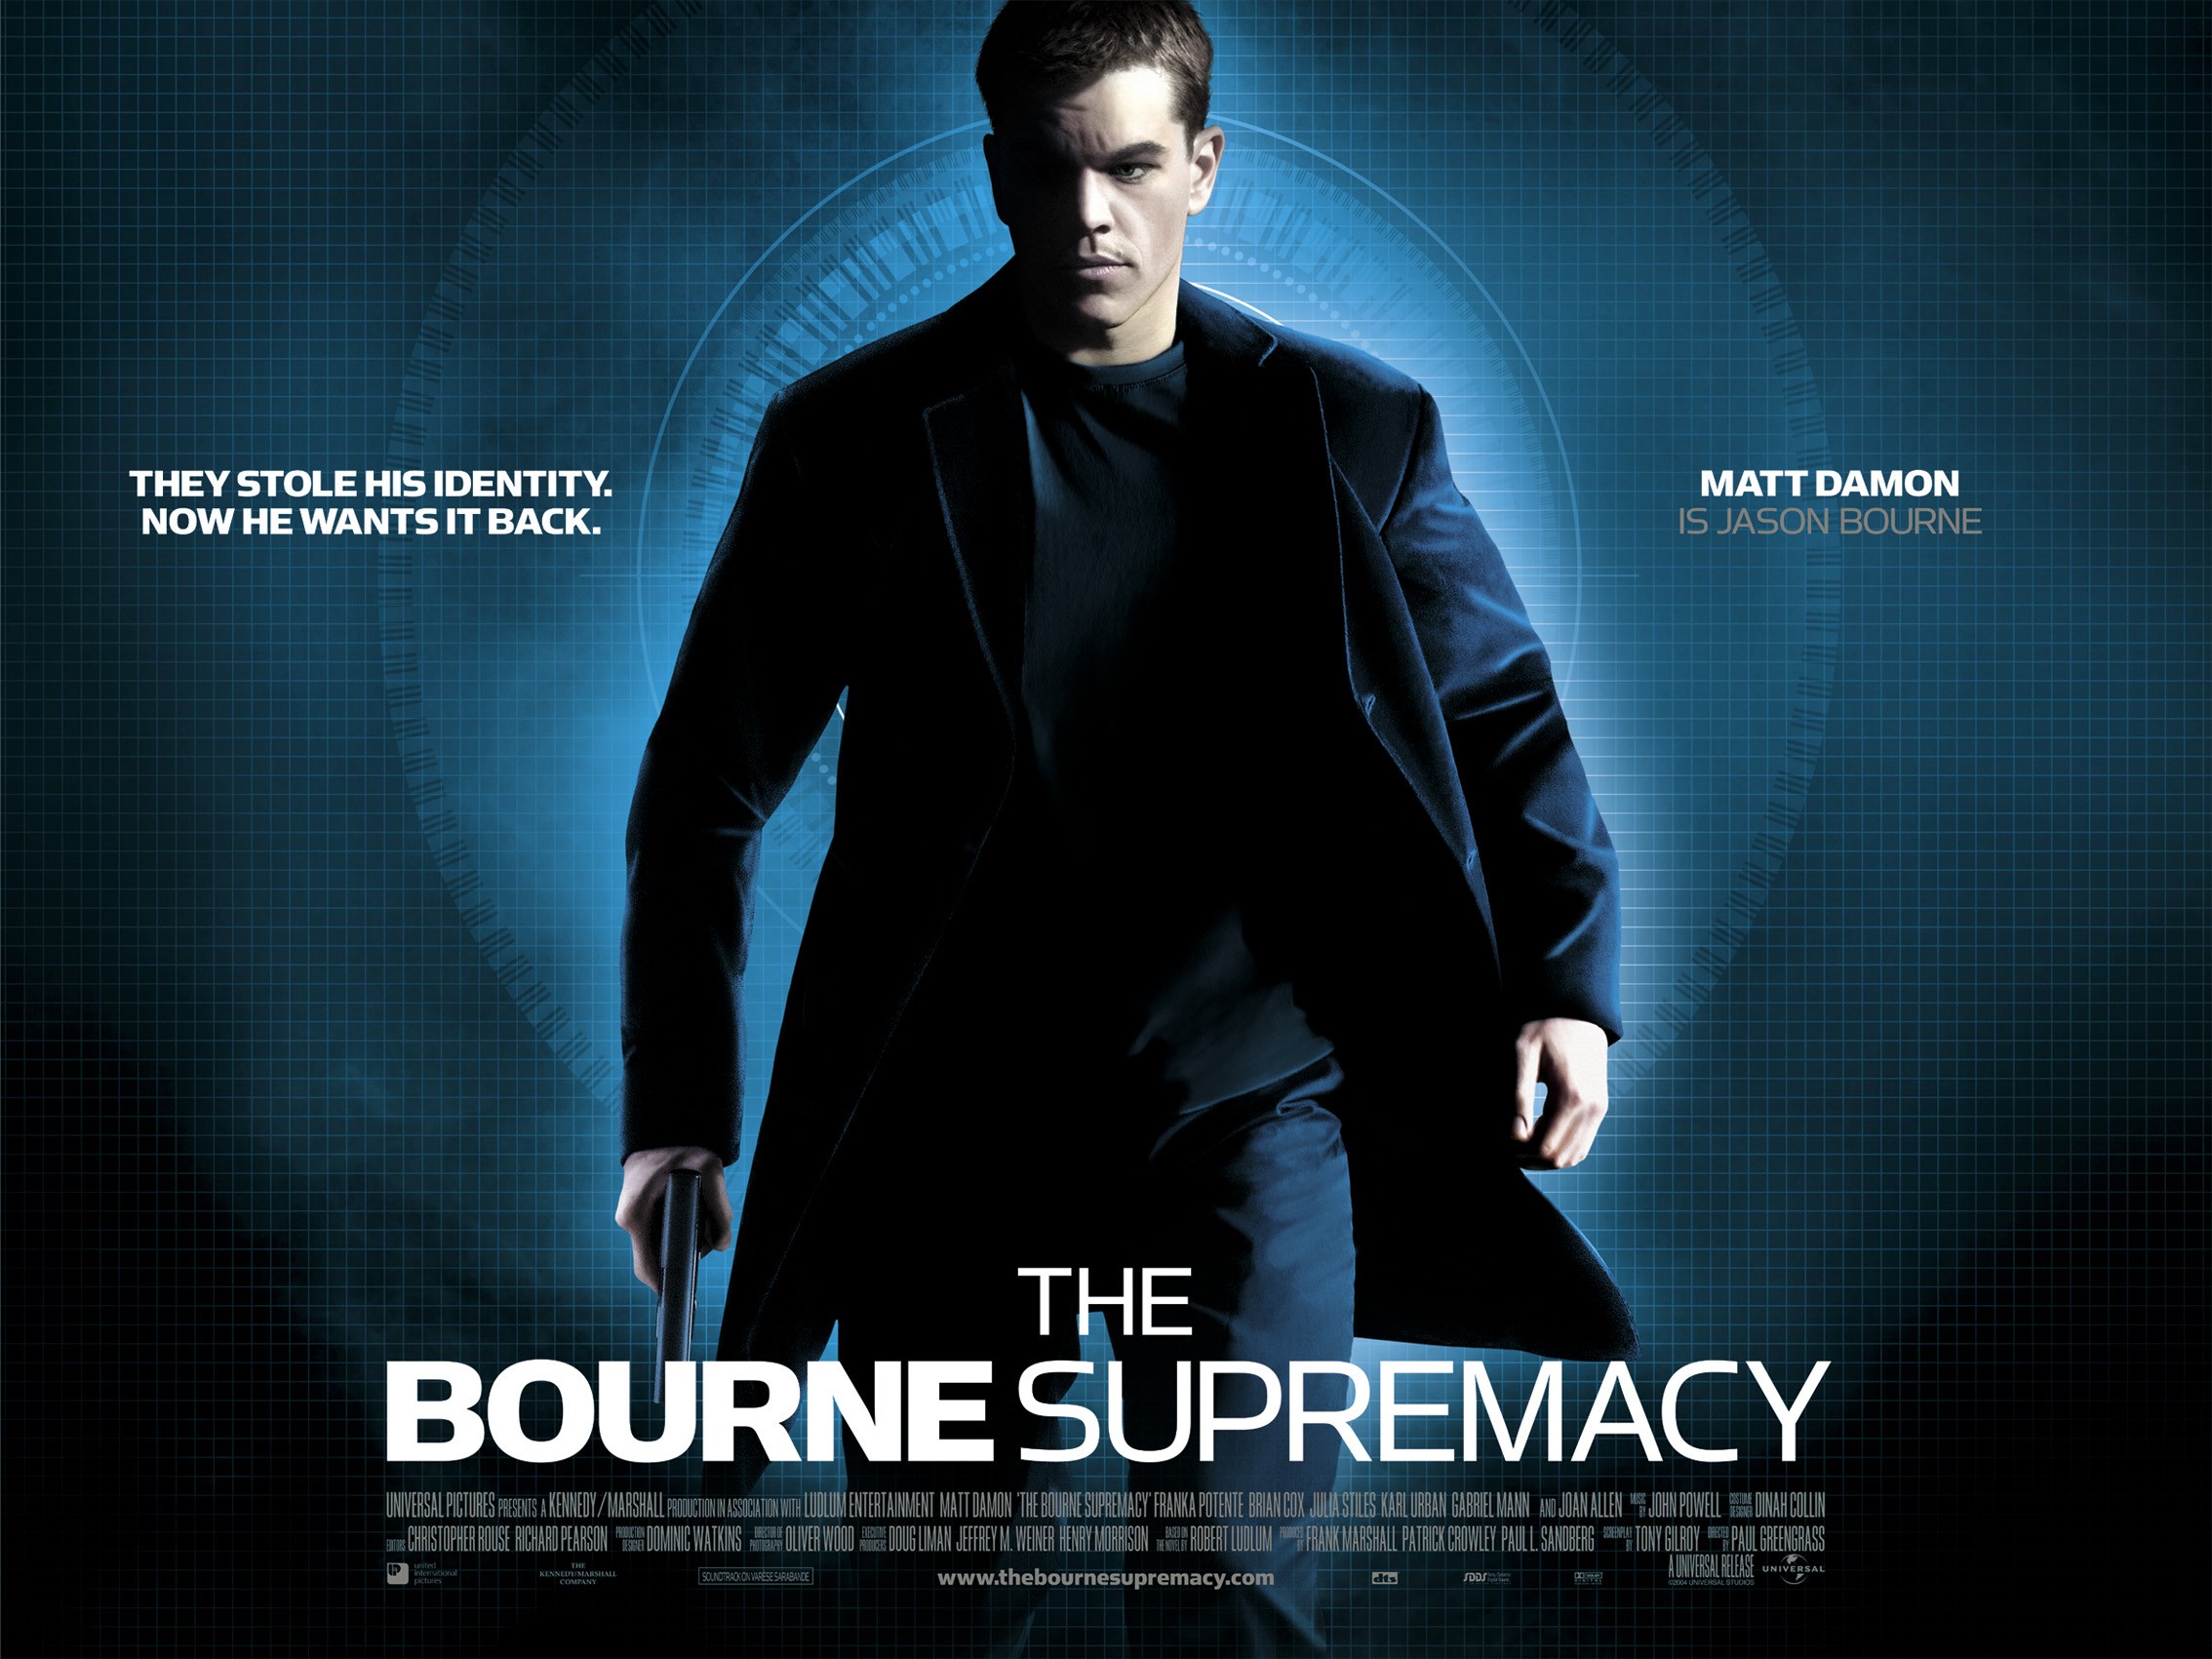 The Bourne Identity Wallpaper - Bourne Supremacy 2004 Movie Poster , HD Wallpaper & Backgrounds